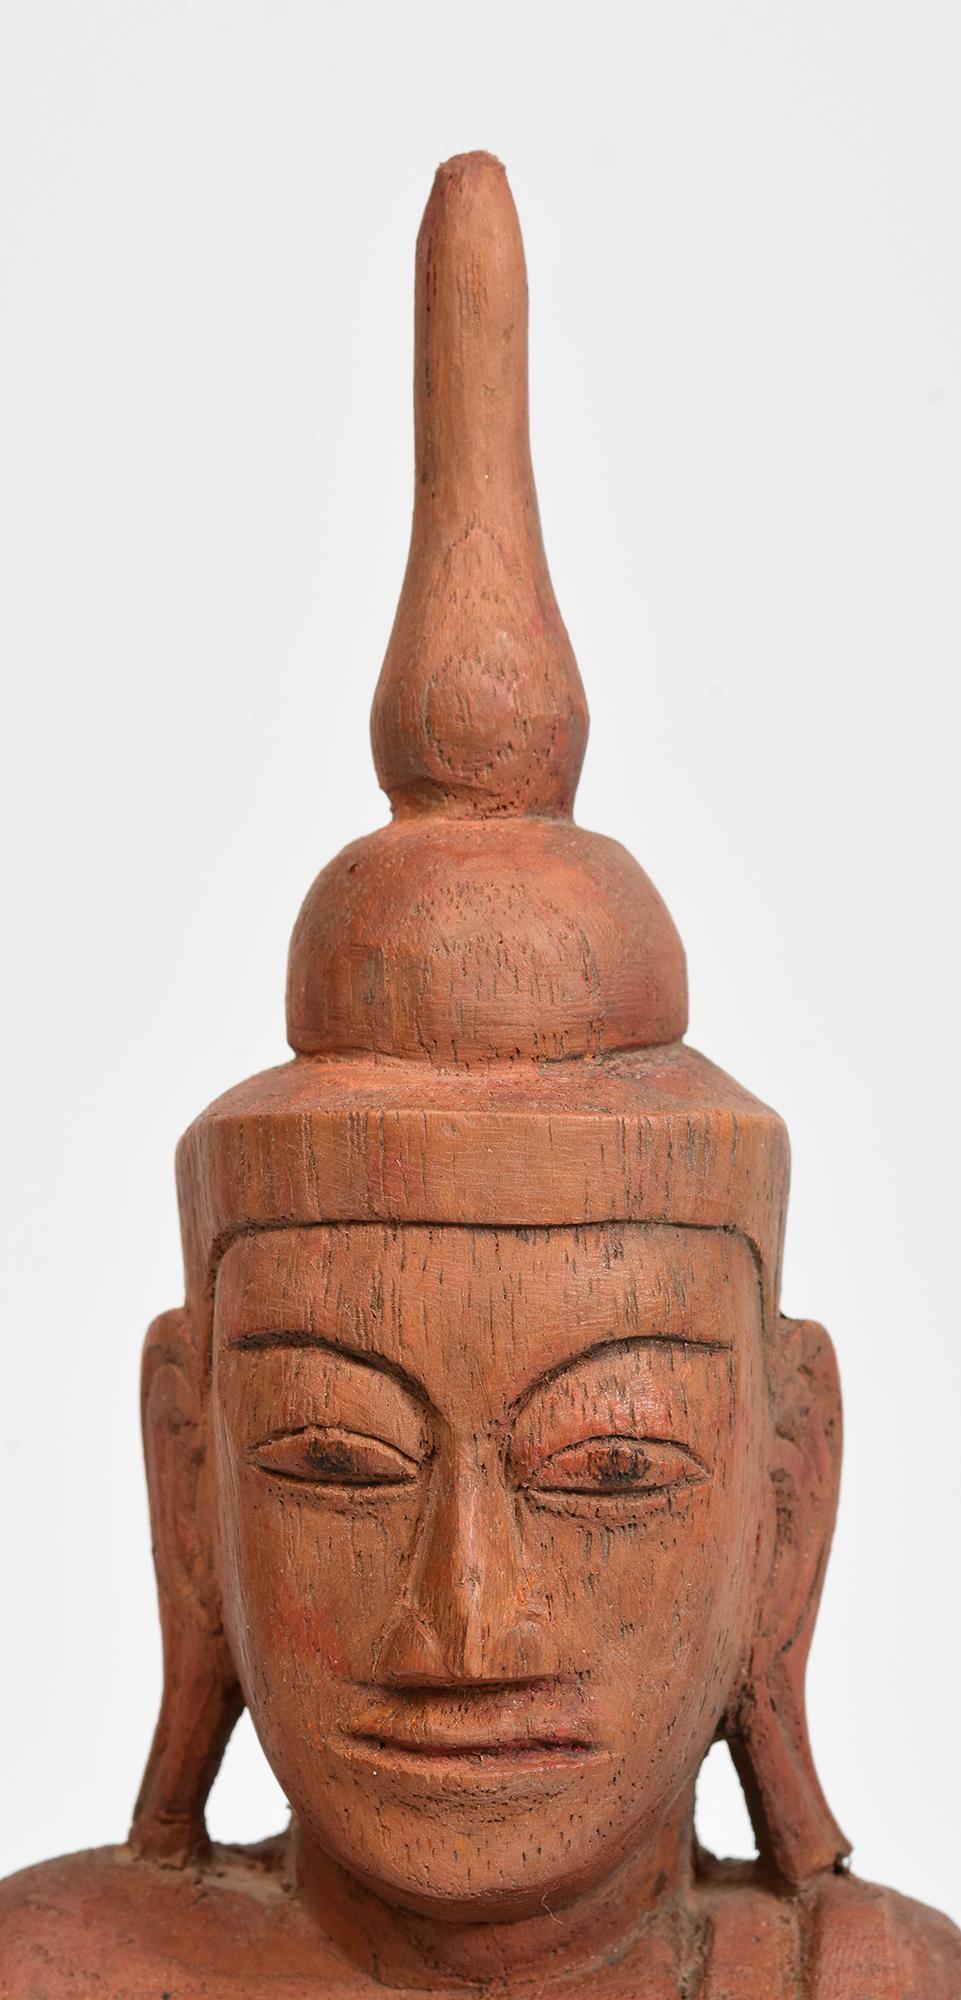 Burmese wooden Buddha sitting in Mara Vijaya (calling the earth to witness) posture on a base.

Age: Burma, Shan Period, 18th Century
Size: Height 30 C.M. / Width 12.3 C.M.
Condition: Nice condition overall (some expected degradation due to its